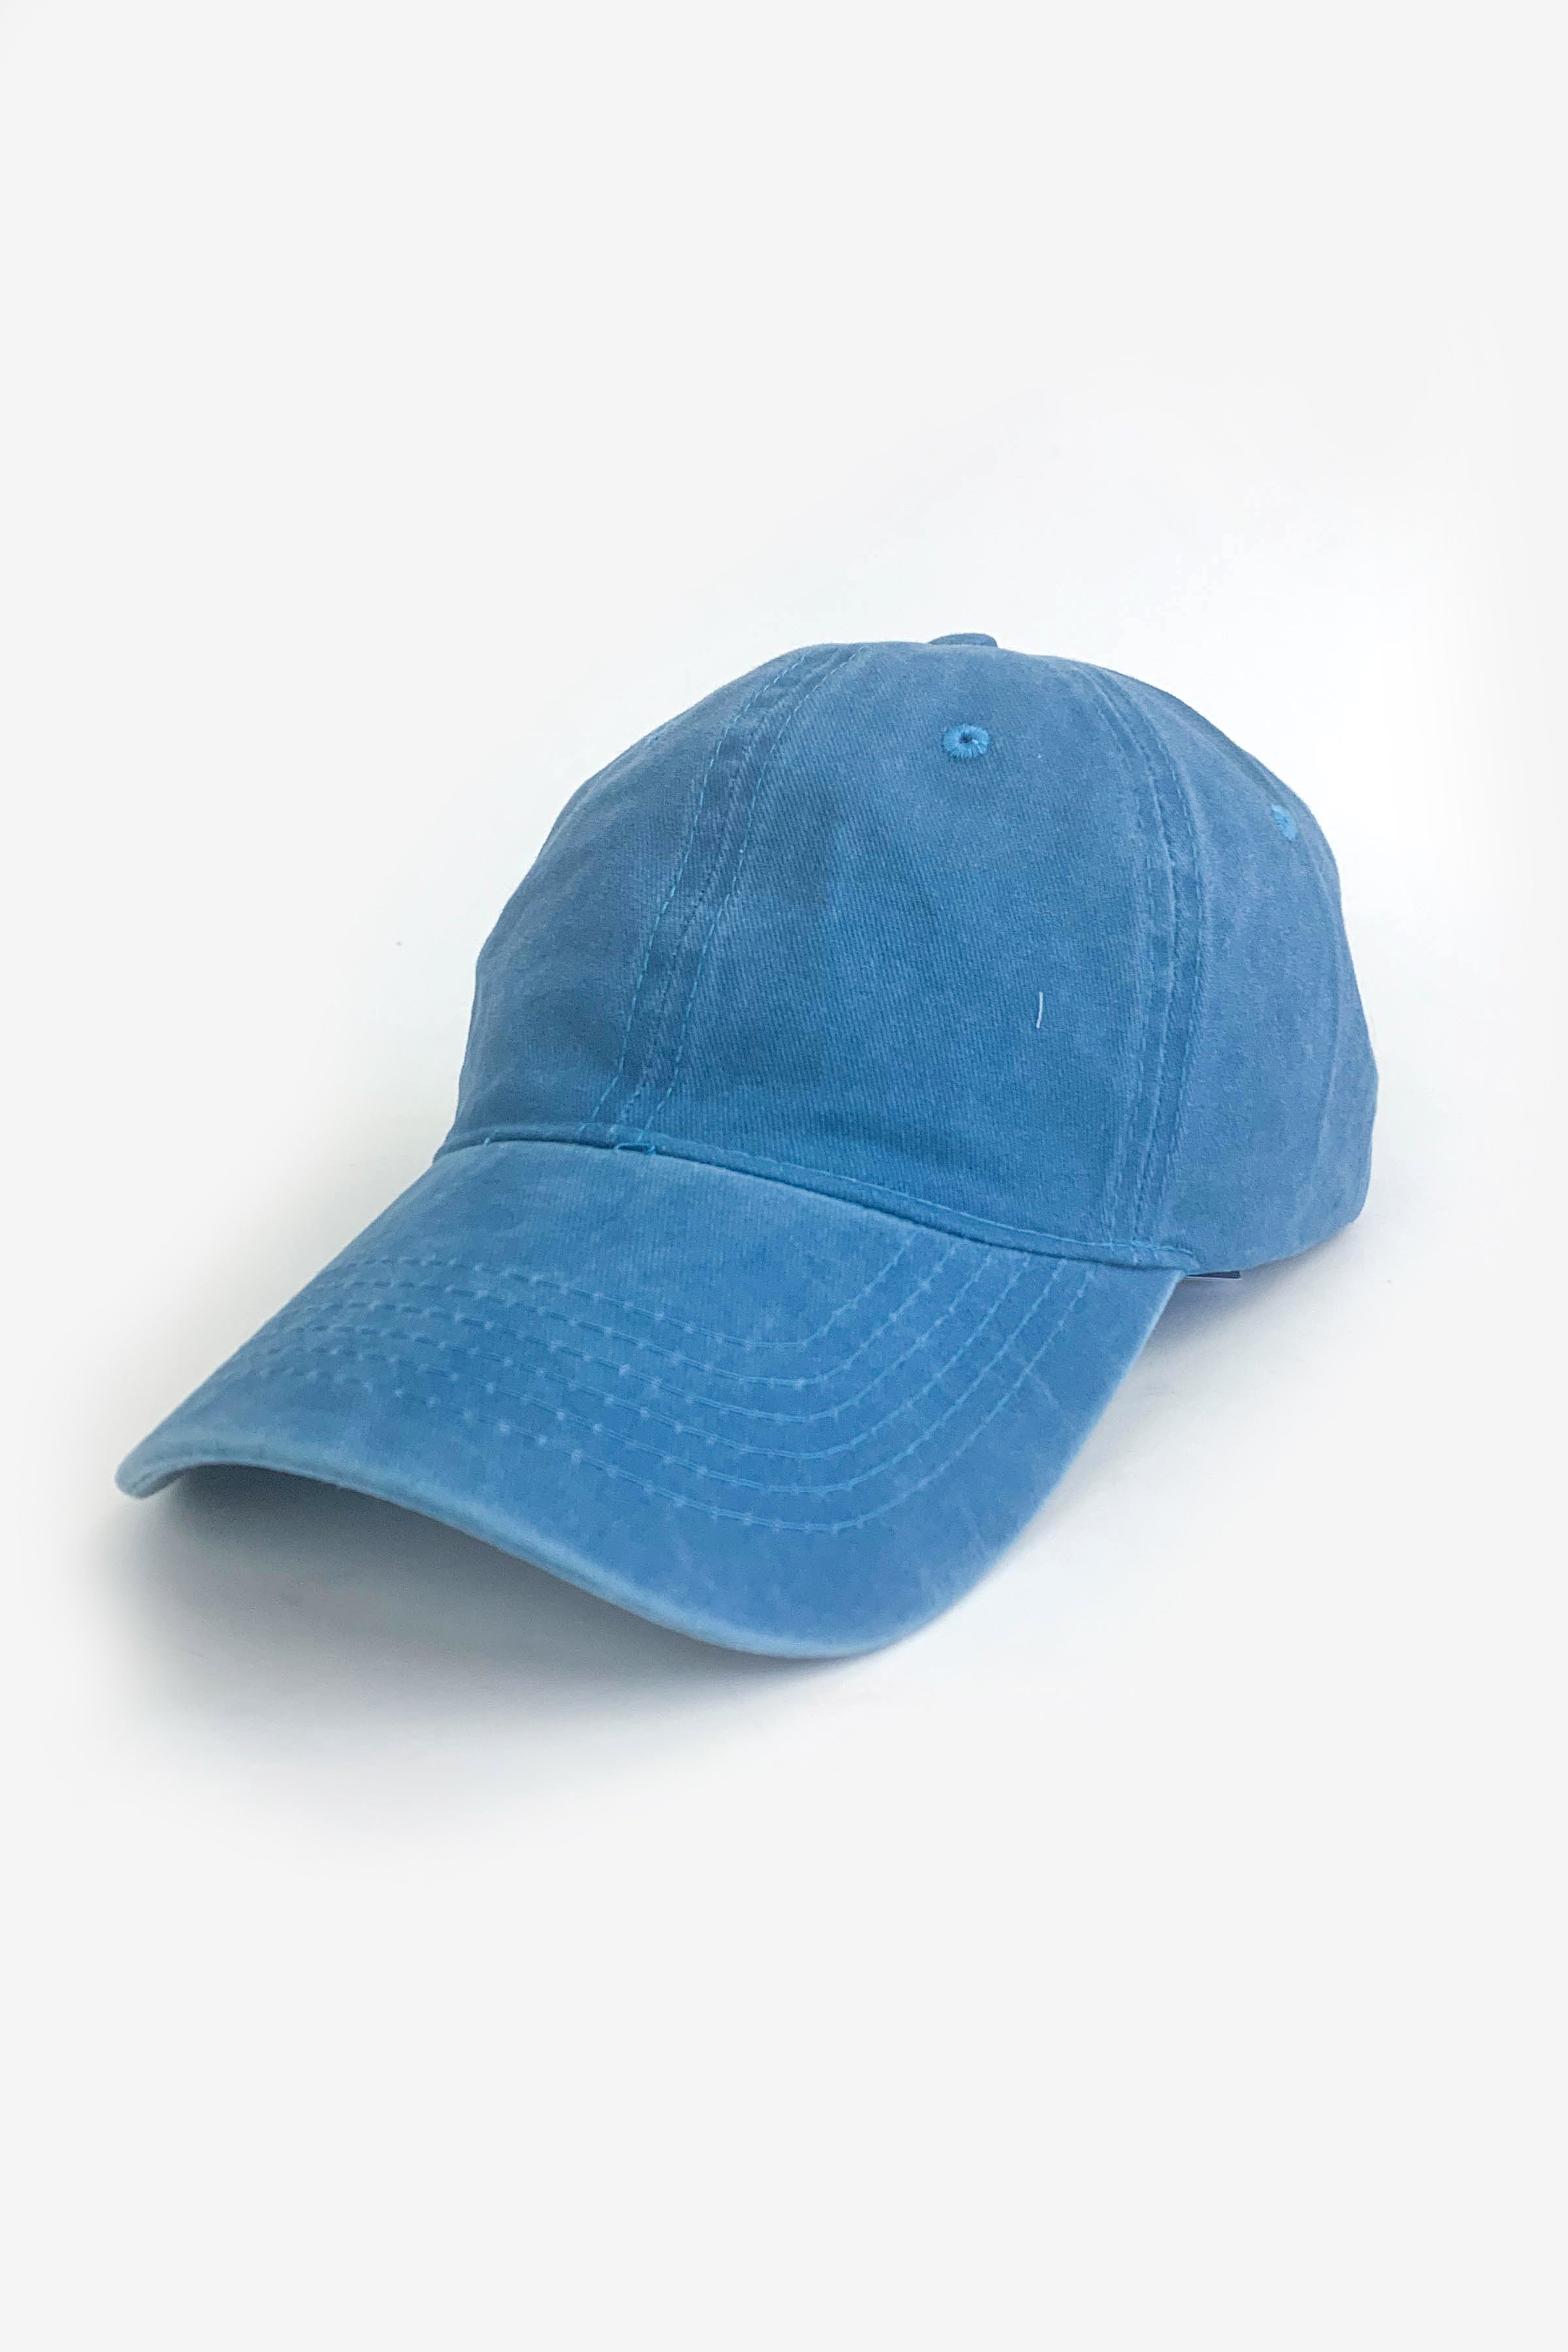 Pigment Dyed Baseball Hat in Cobalt